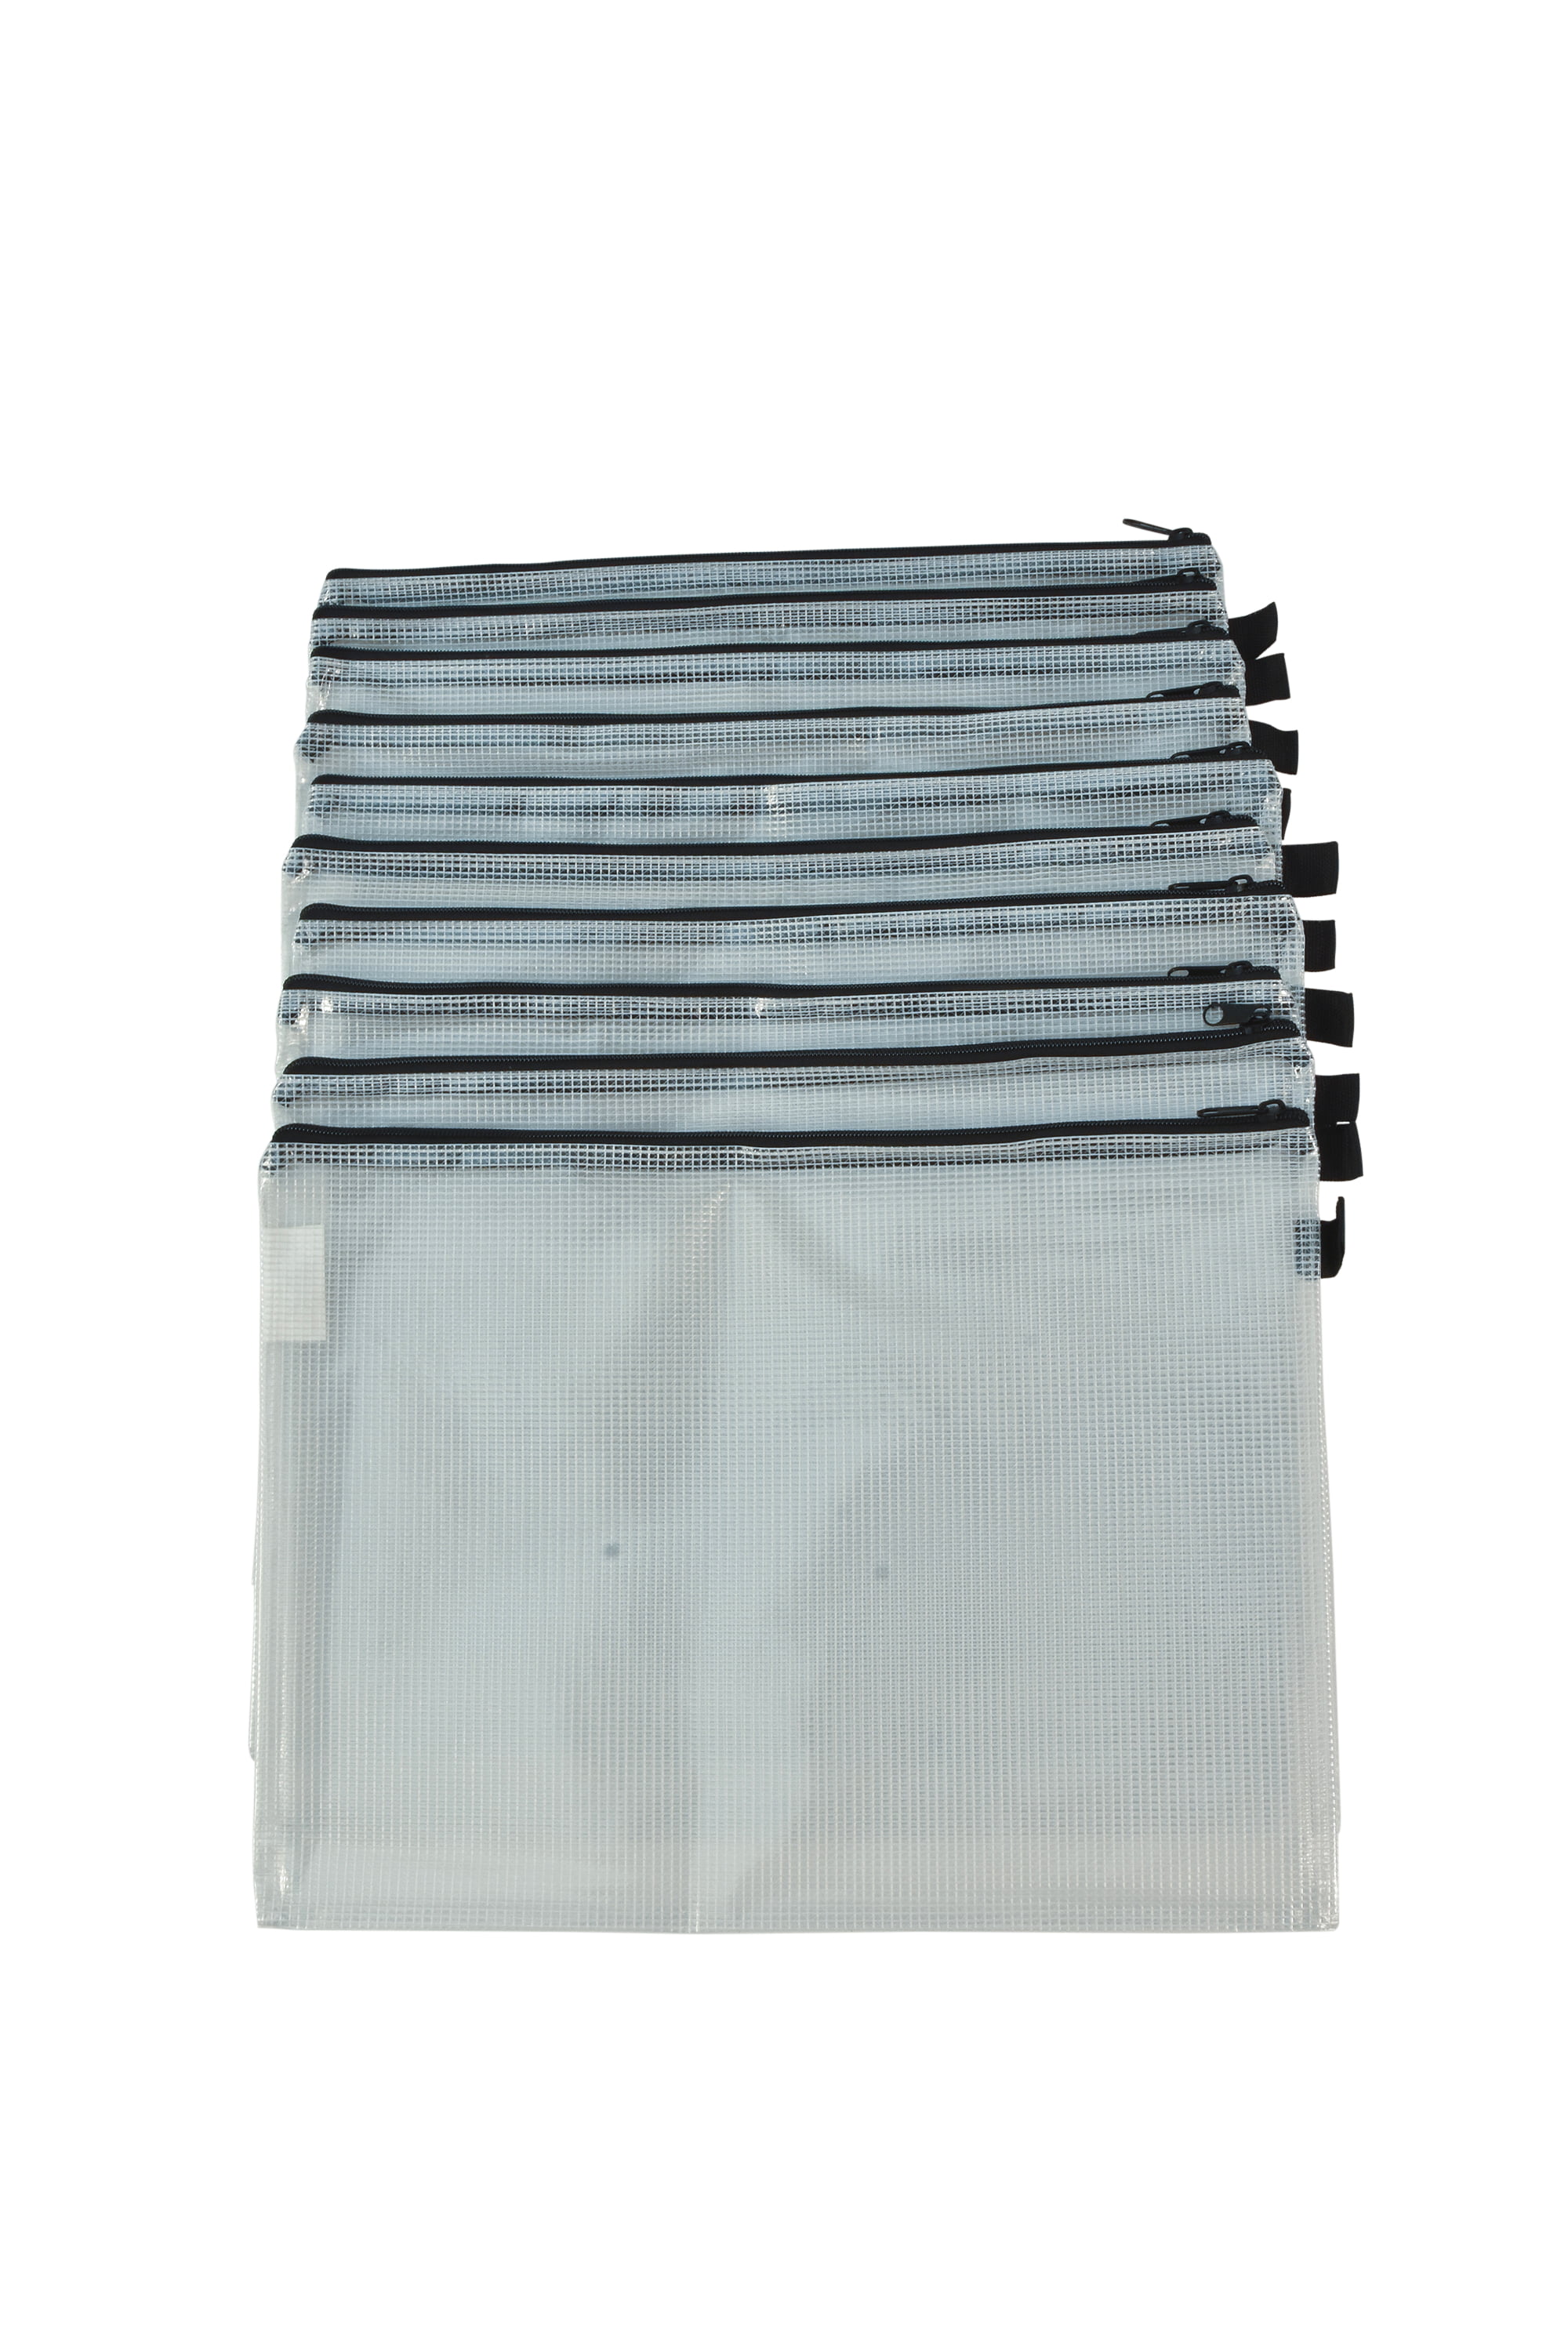 Sax Mesh Zippered Bags, 10 x 13 Inches, Clear with Blue Trim, Pack